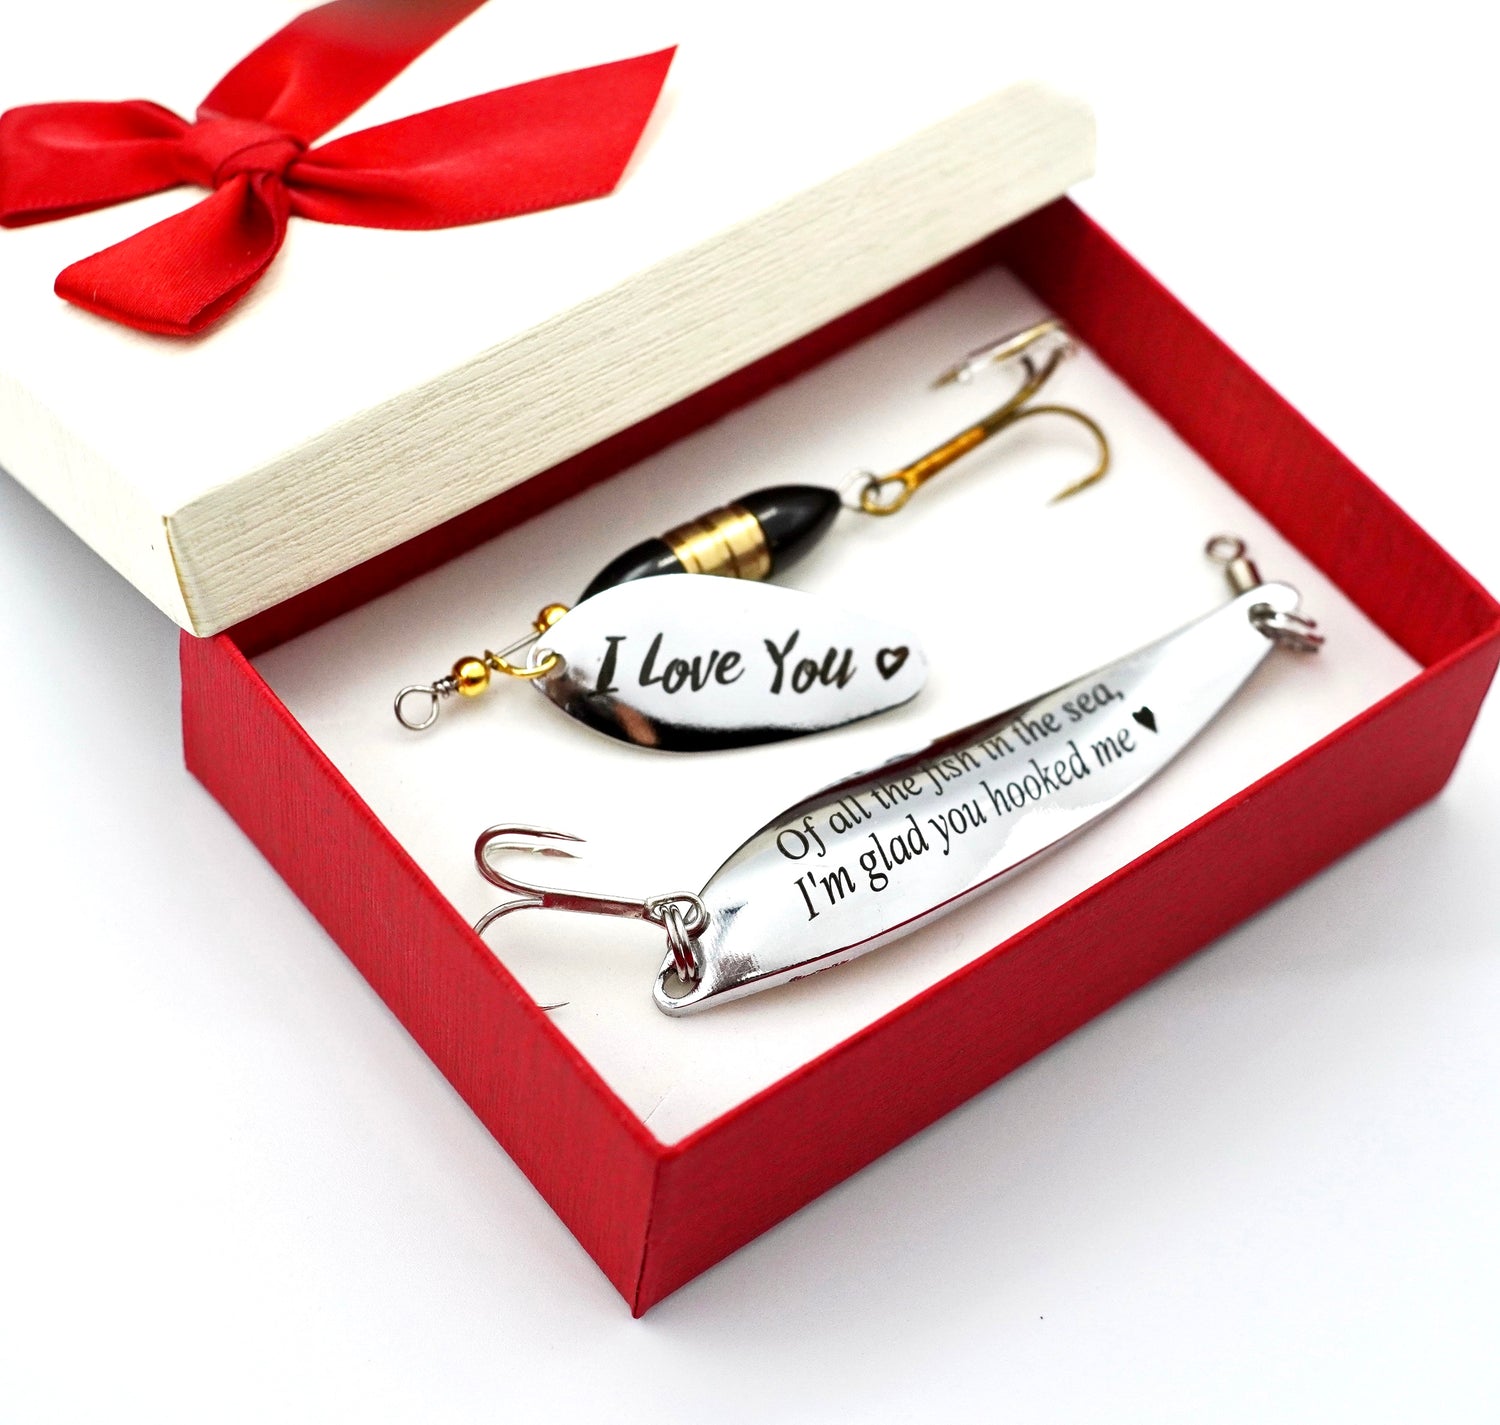 Dentist Fishing Lure Personalized Dentist Lure World's -   Valentine  gift for dad, Gifts for boss, Personalized birthday gifts